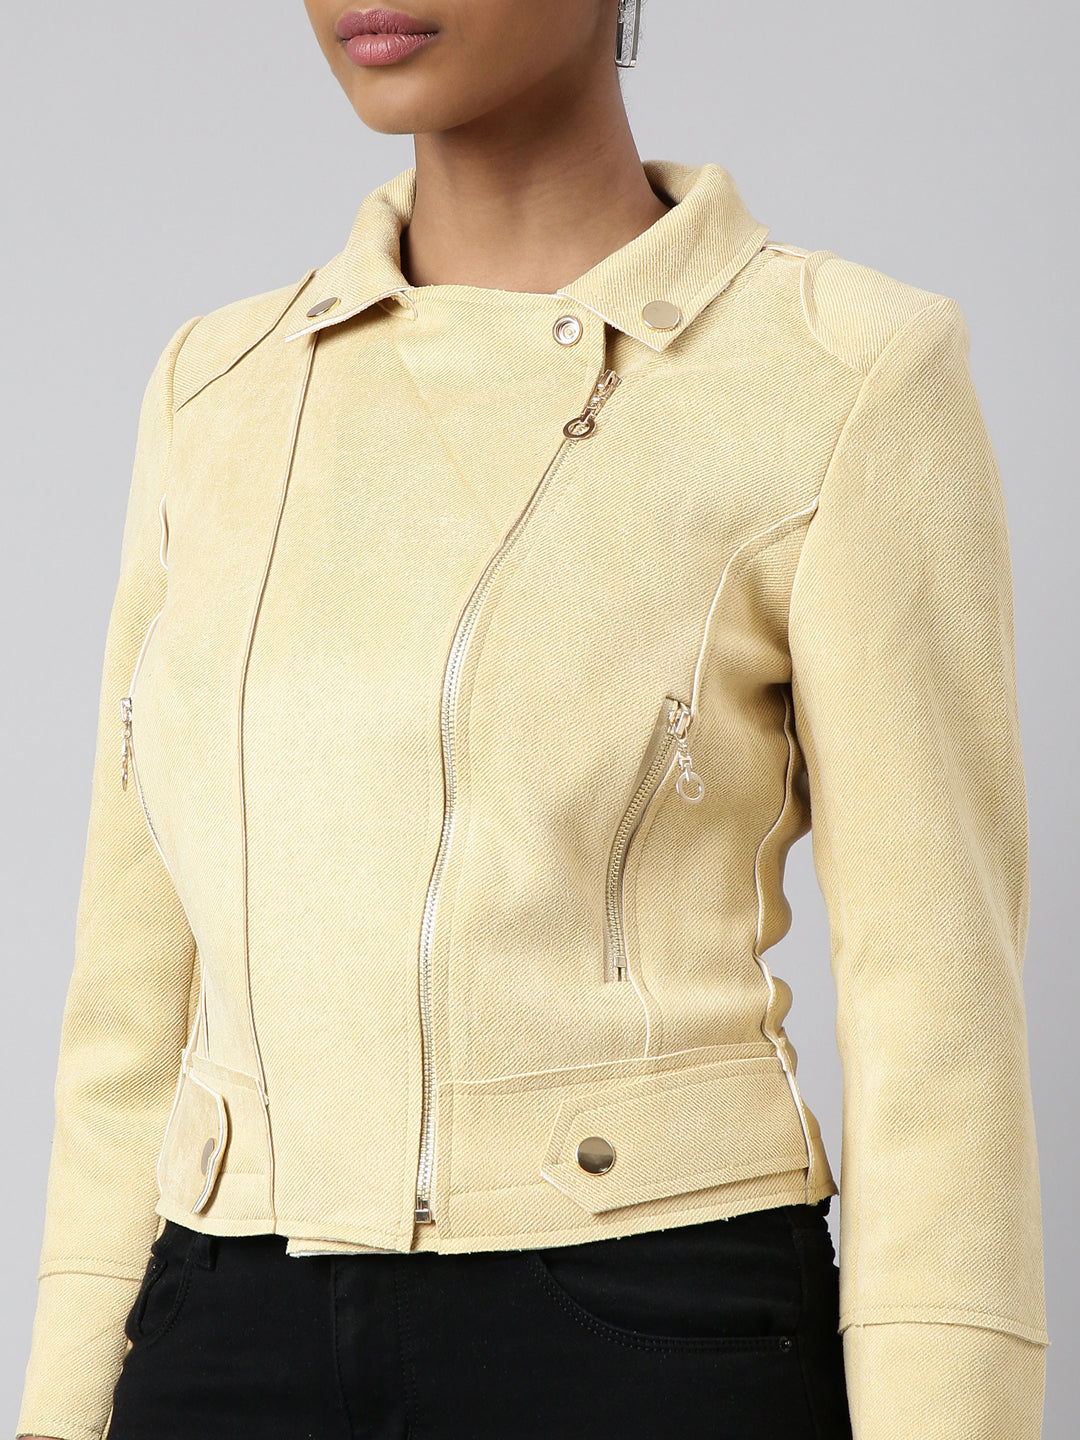 Women Solid Yellow Tailored Jacket